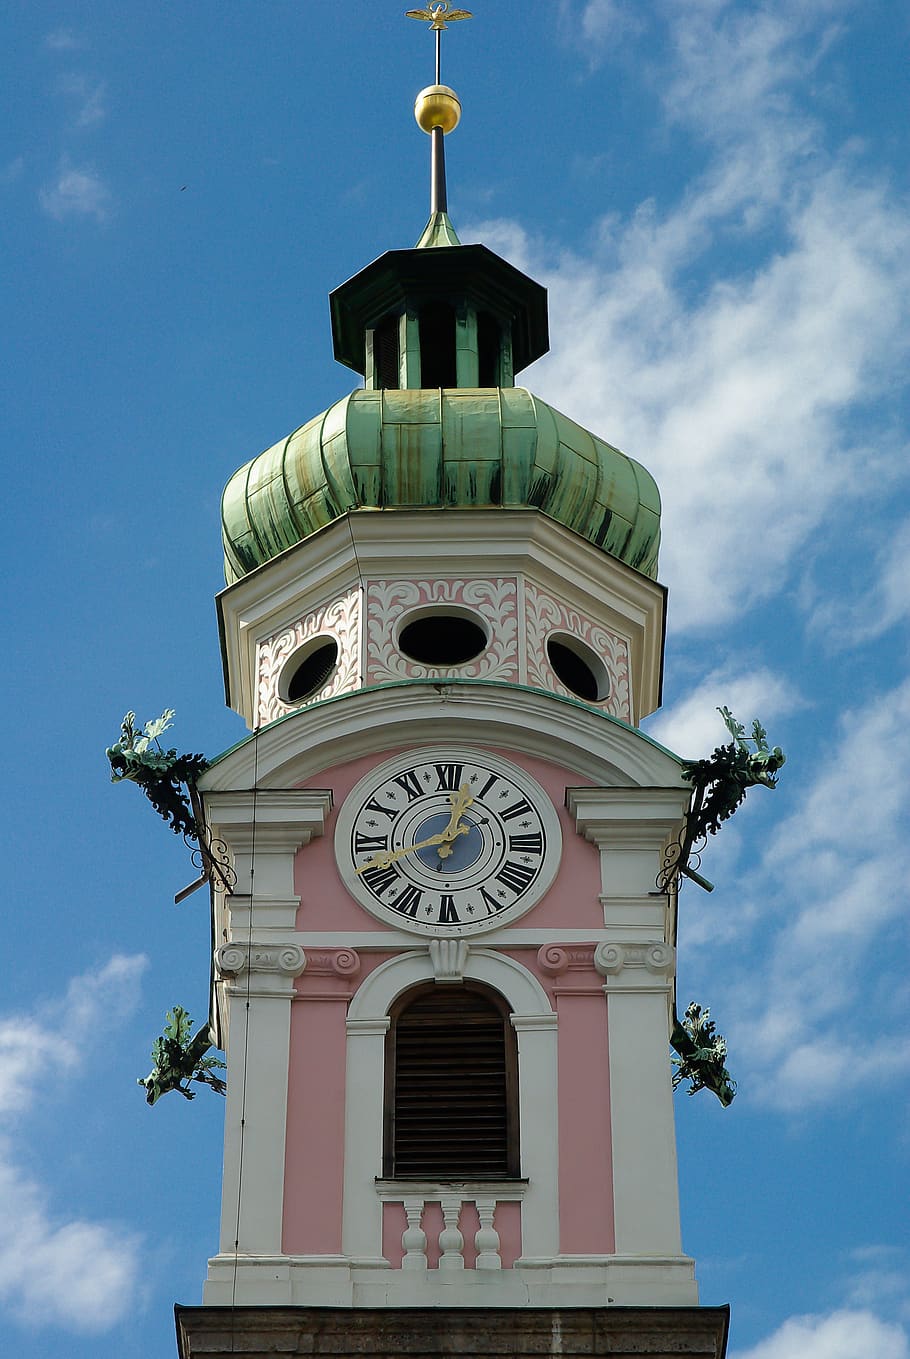 austria, innsbruck, bell tower, clock, tyrol, sky, architecture, building exterior, built structure, low angle view